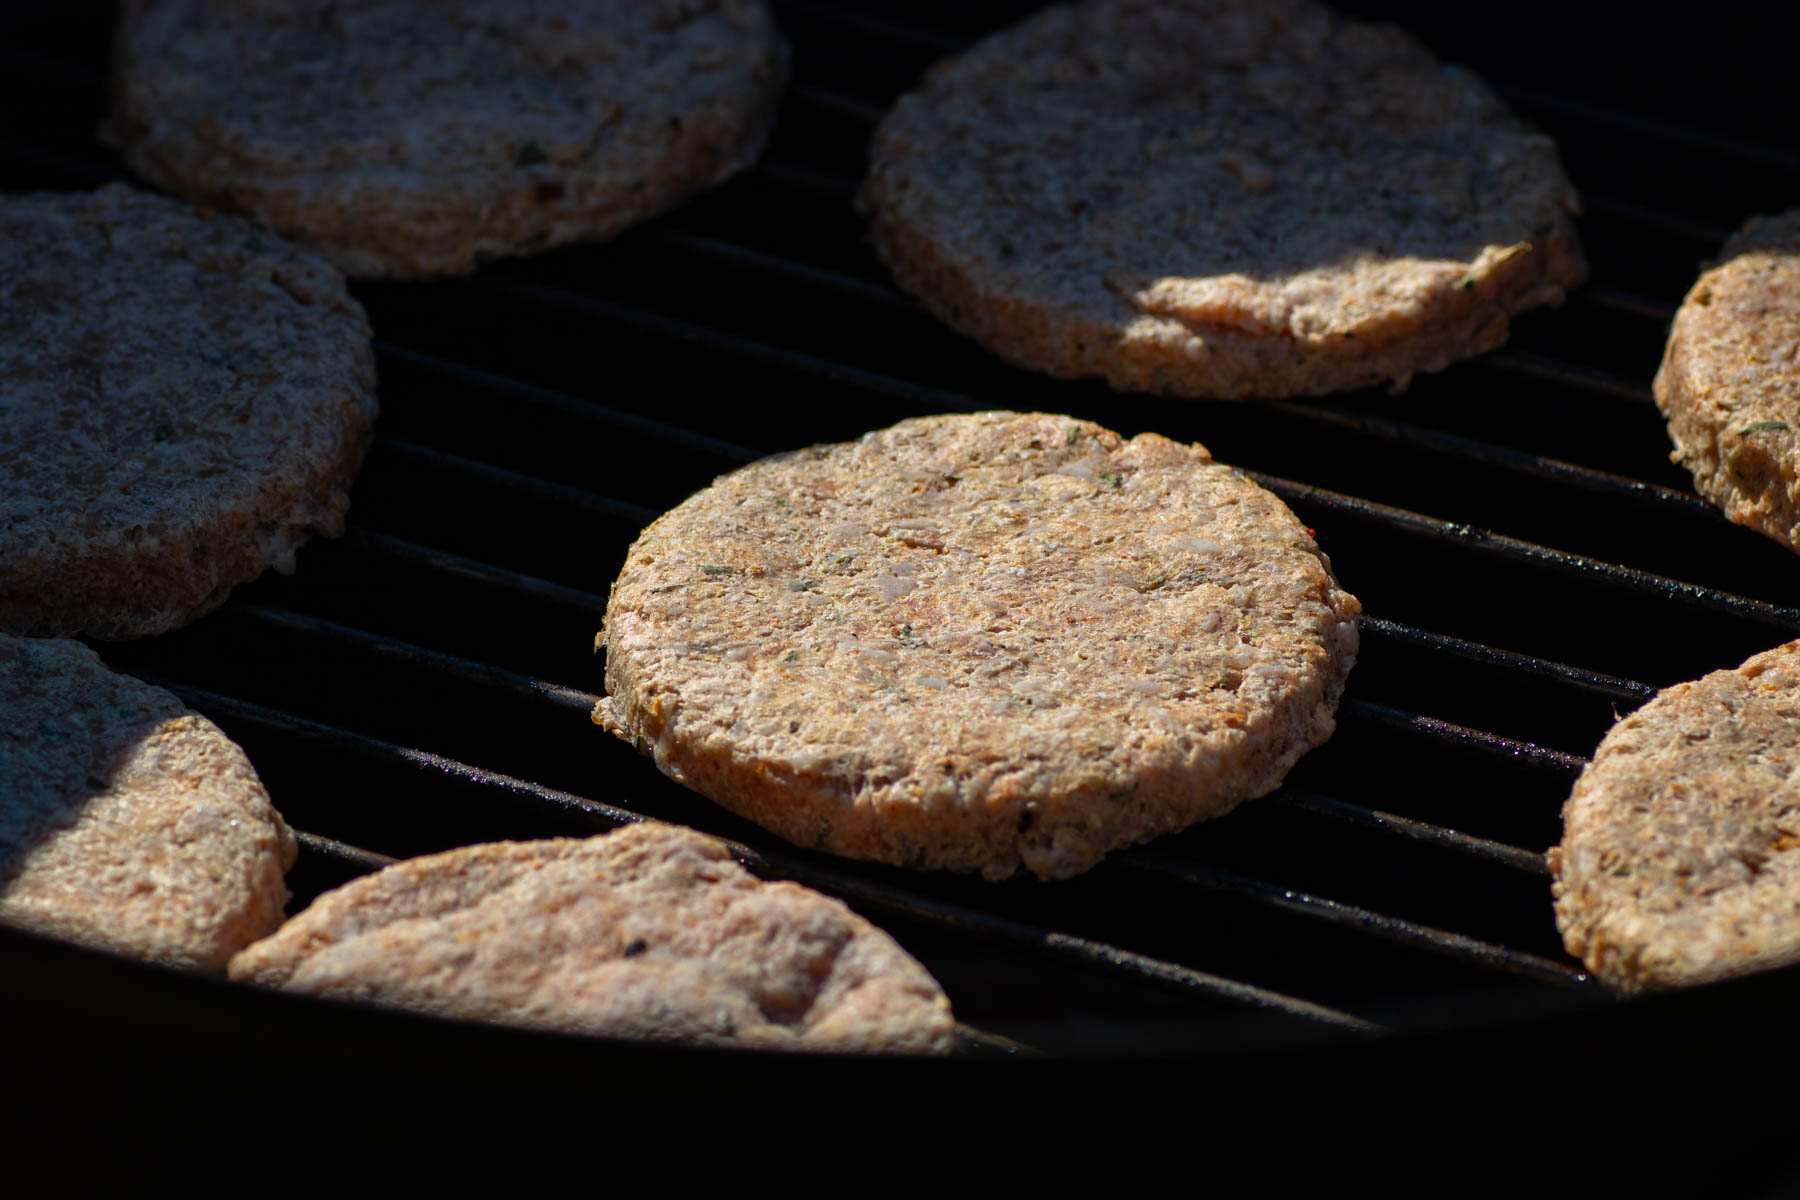 Breakfast sausage patties being smoked in a smoker.